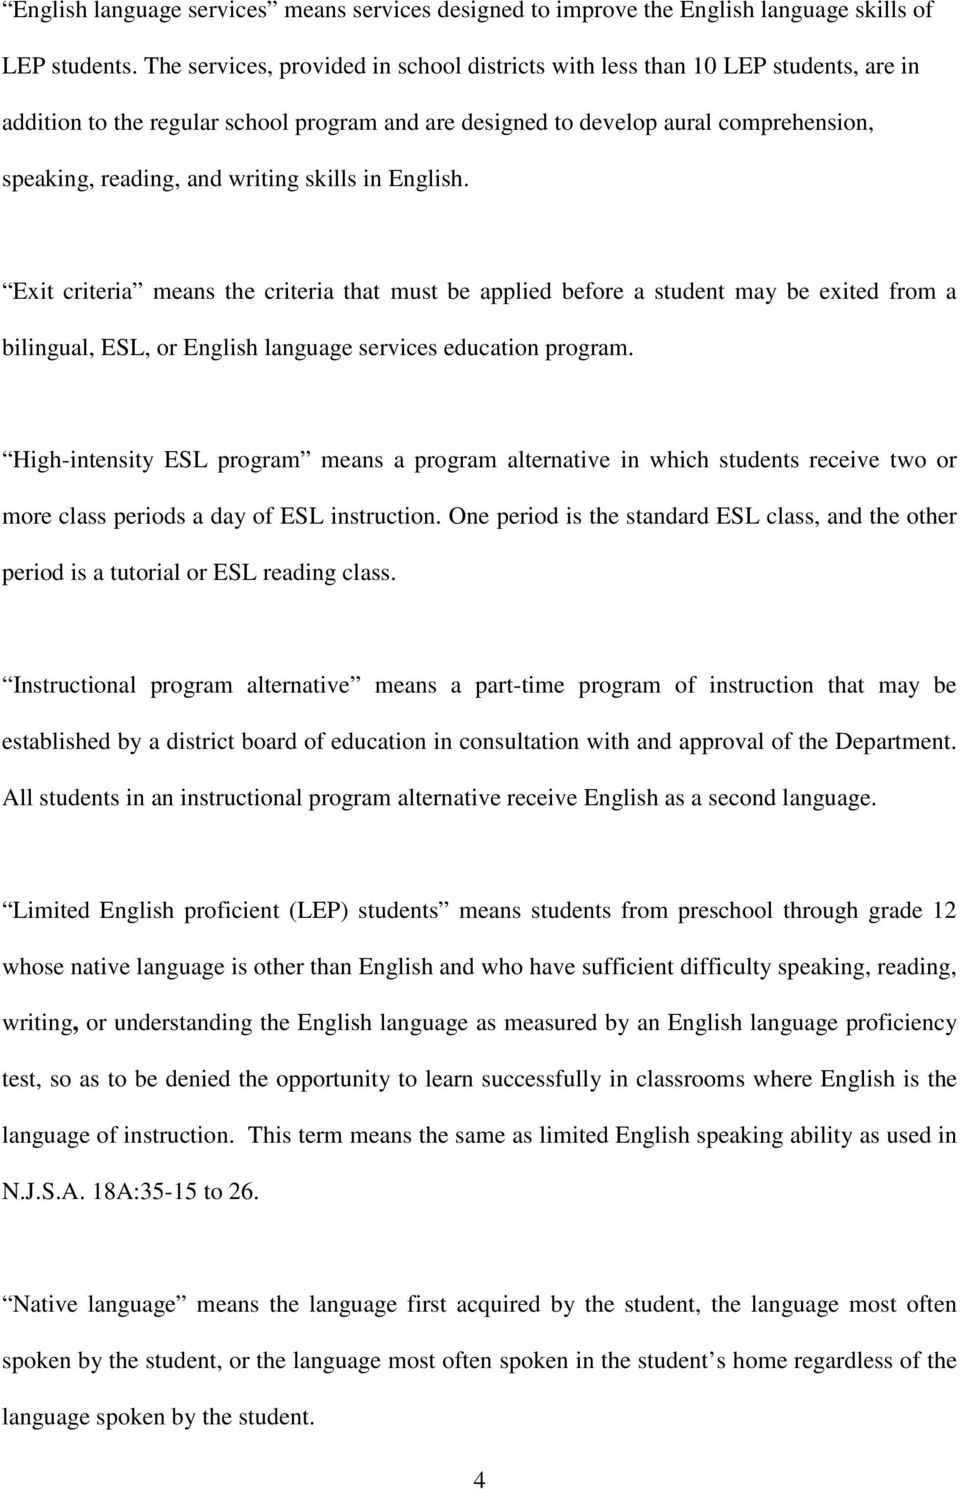 writing skills in English. Exit criteria means the criteria that must be applied before a student may be exited from a bilingual, ESL, or English language services education program.